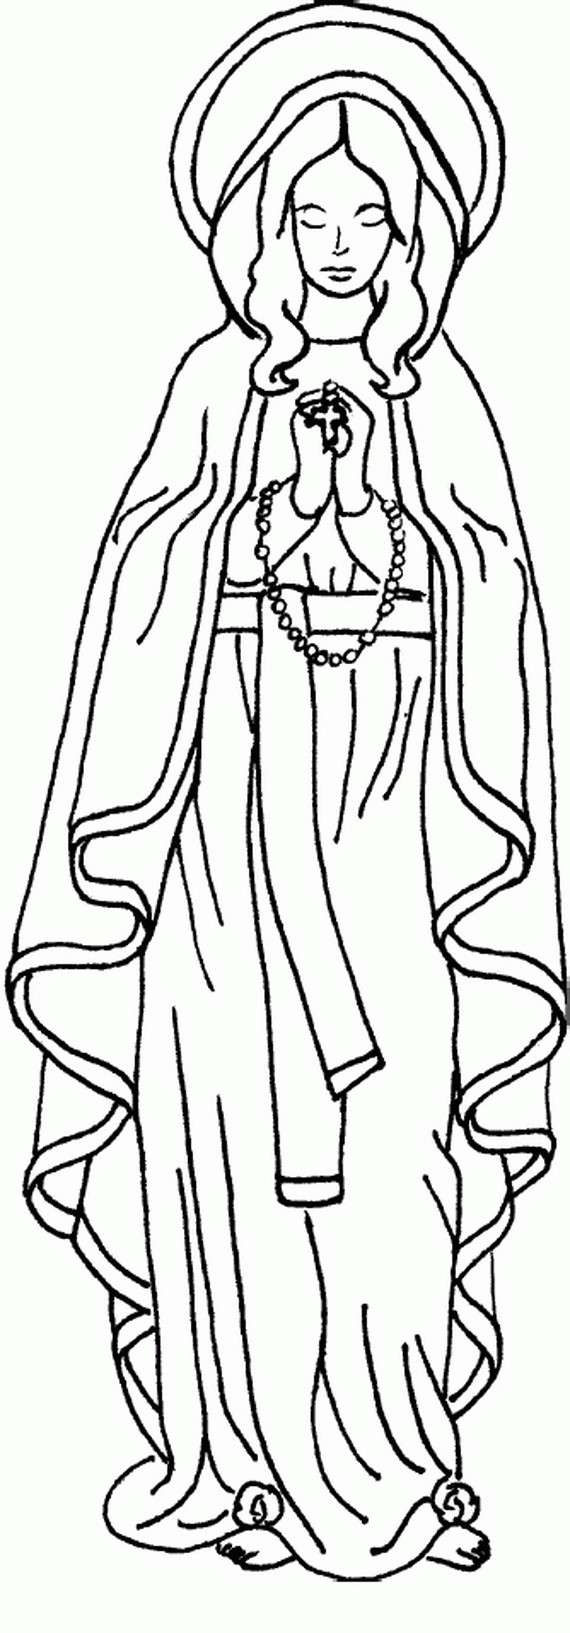 Mary Coloring Sheet - Coloring Pages for Kids and for Adults